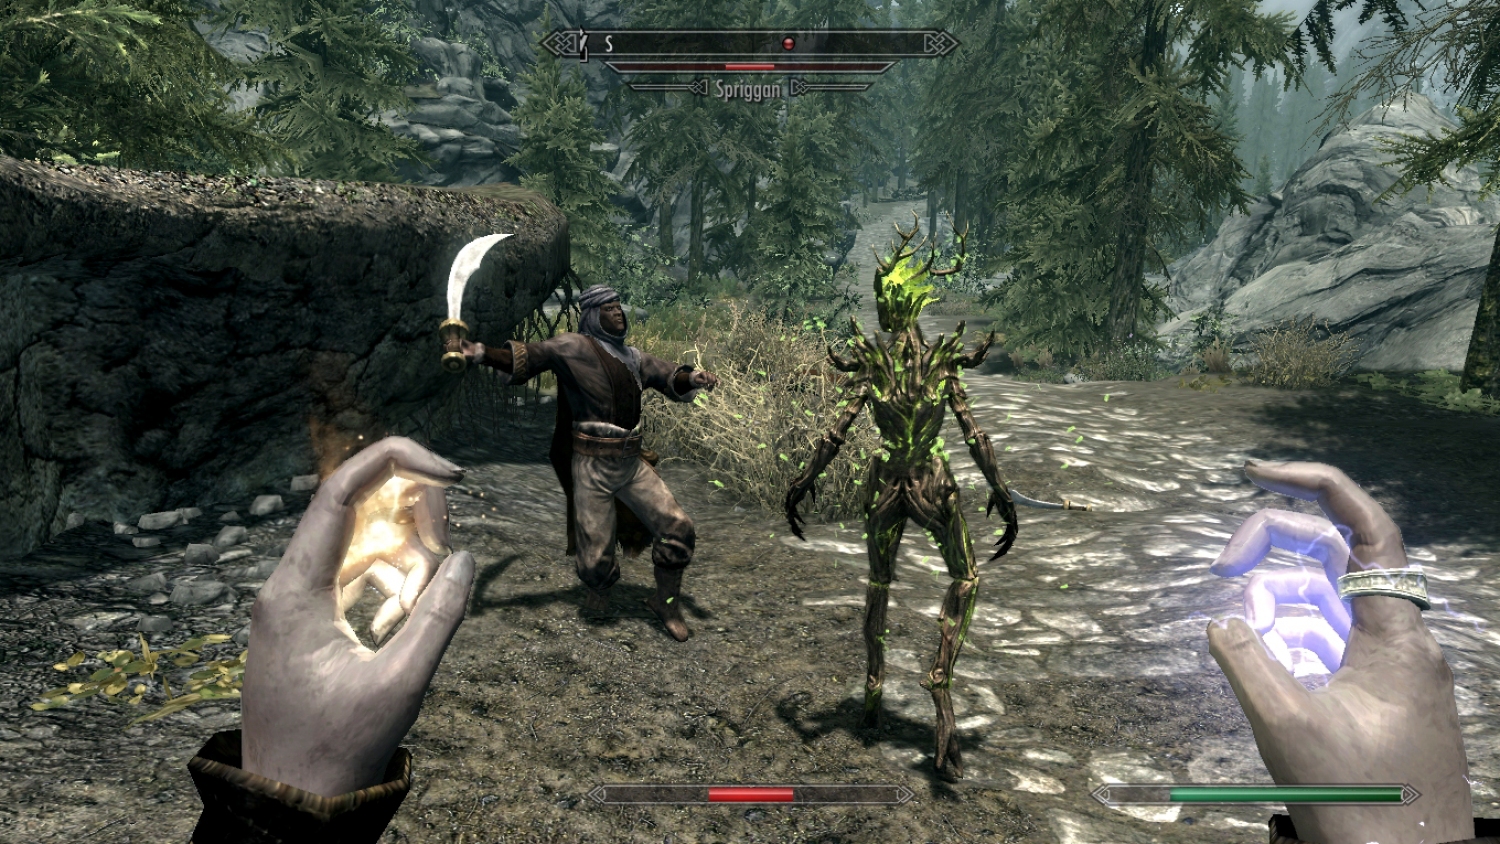 Are the Draugr apologizing to me?